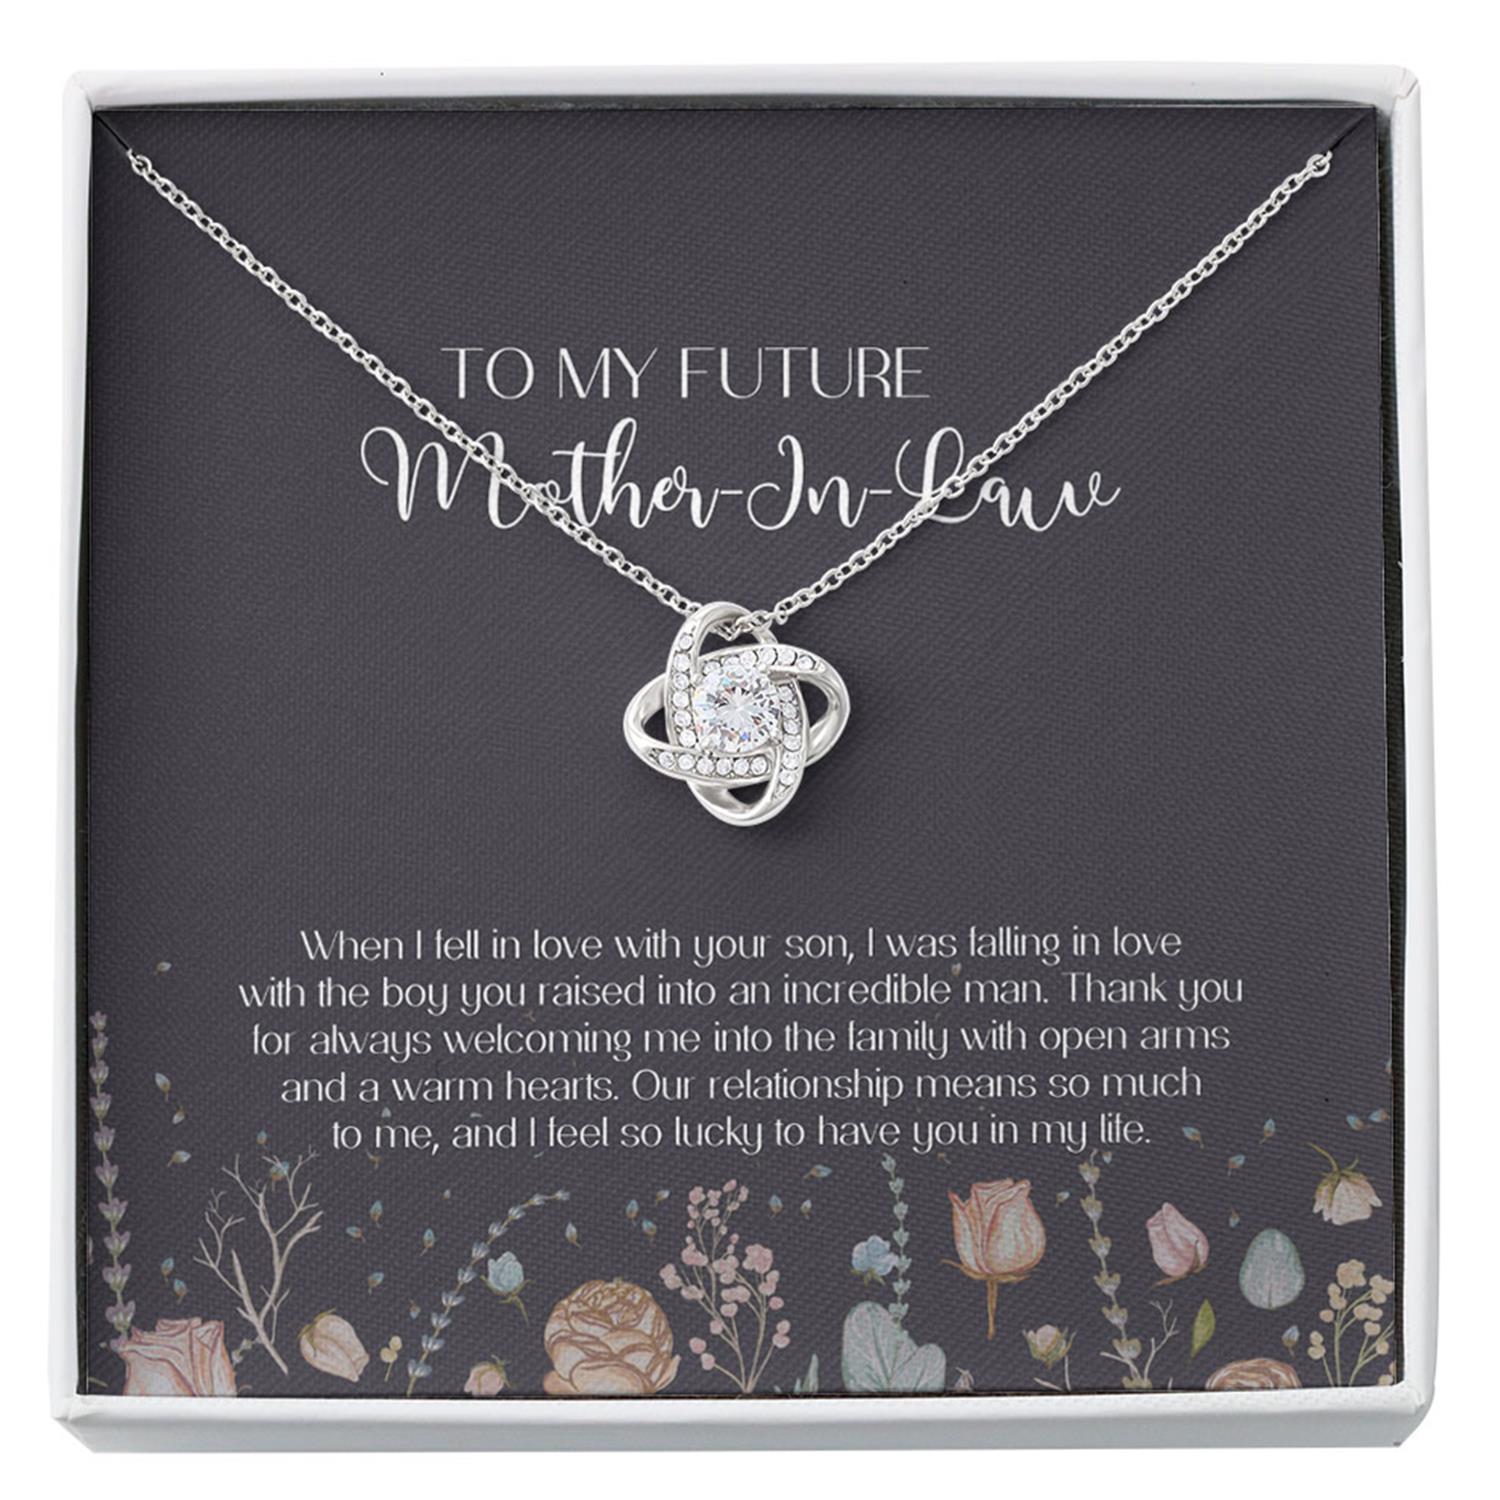 Mother-in-law Necklace, Necklace To My Fututure Mother-in-Law - Mothers Day Necklace Gift Custom Necklace